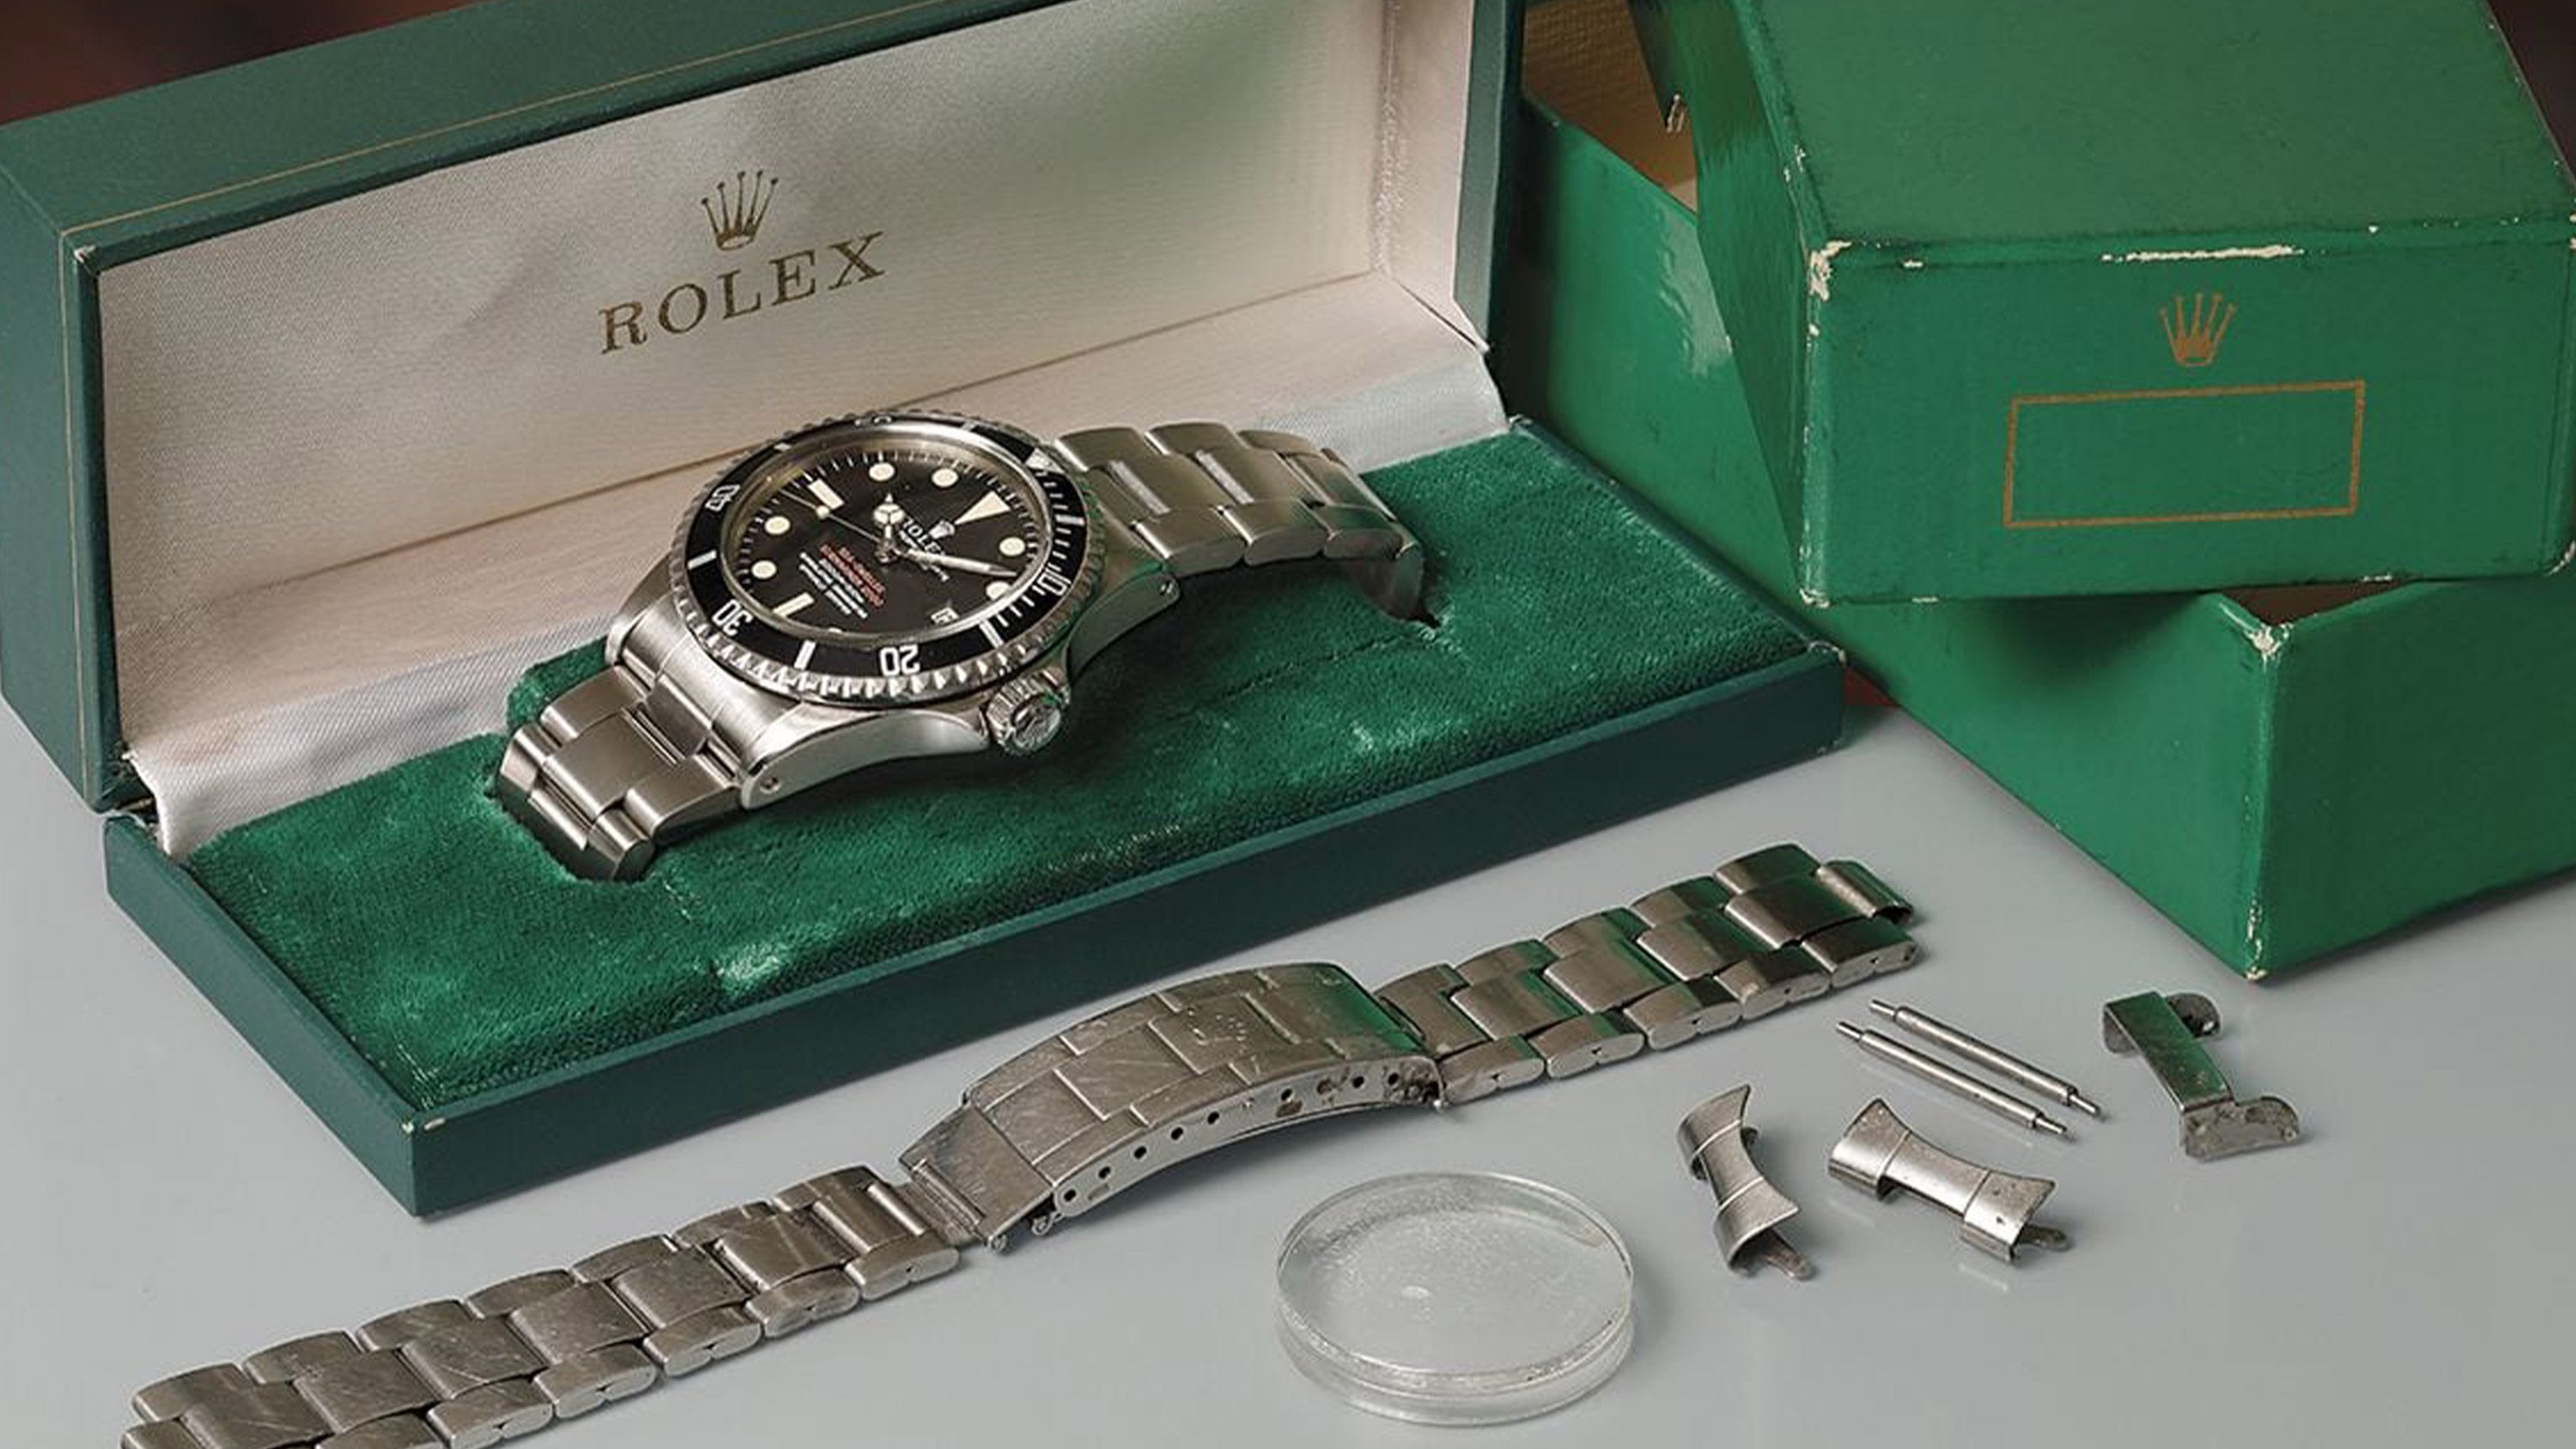 syg klinge ophobe The 10 Most Important Rolex Watches Ever Made